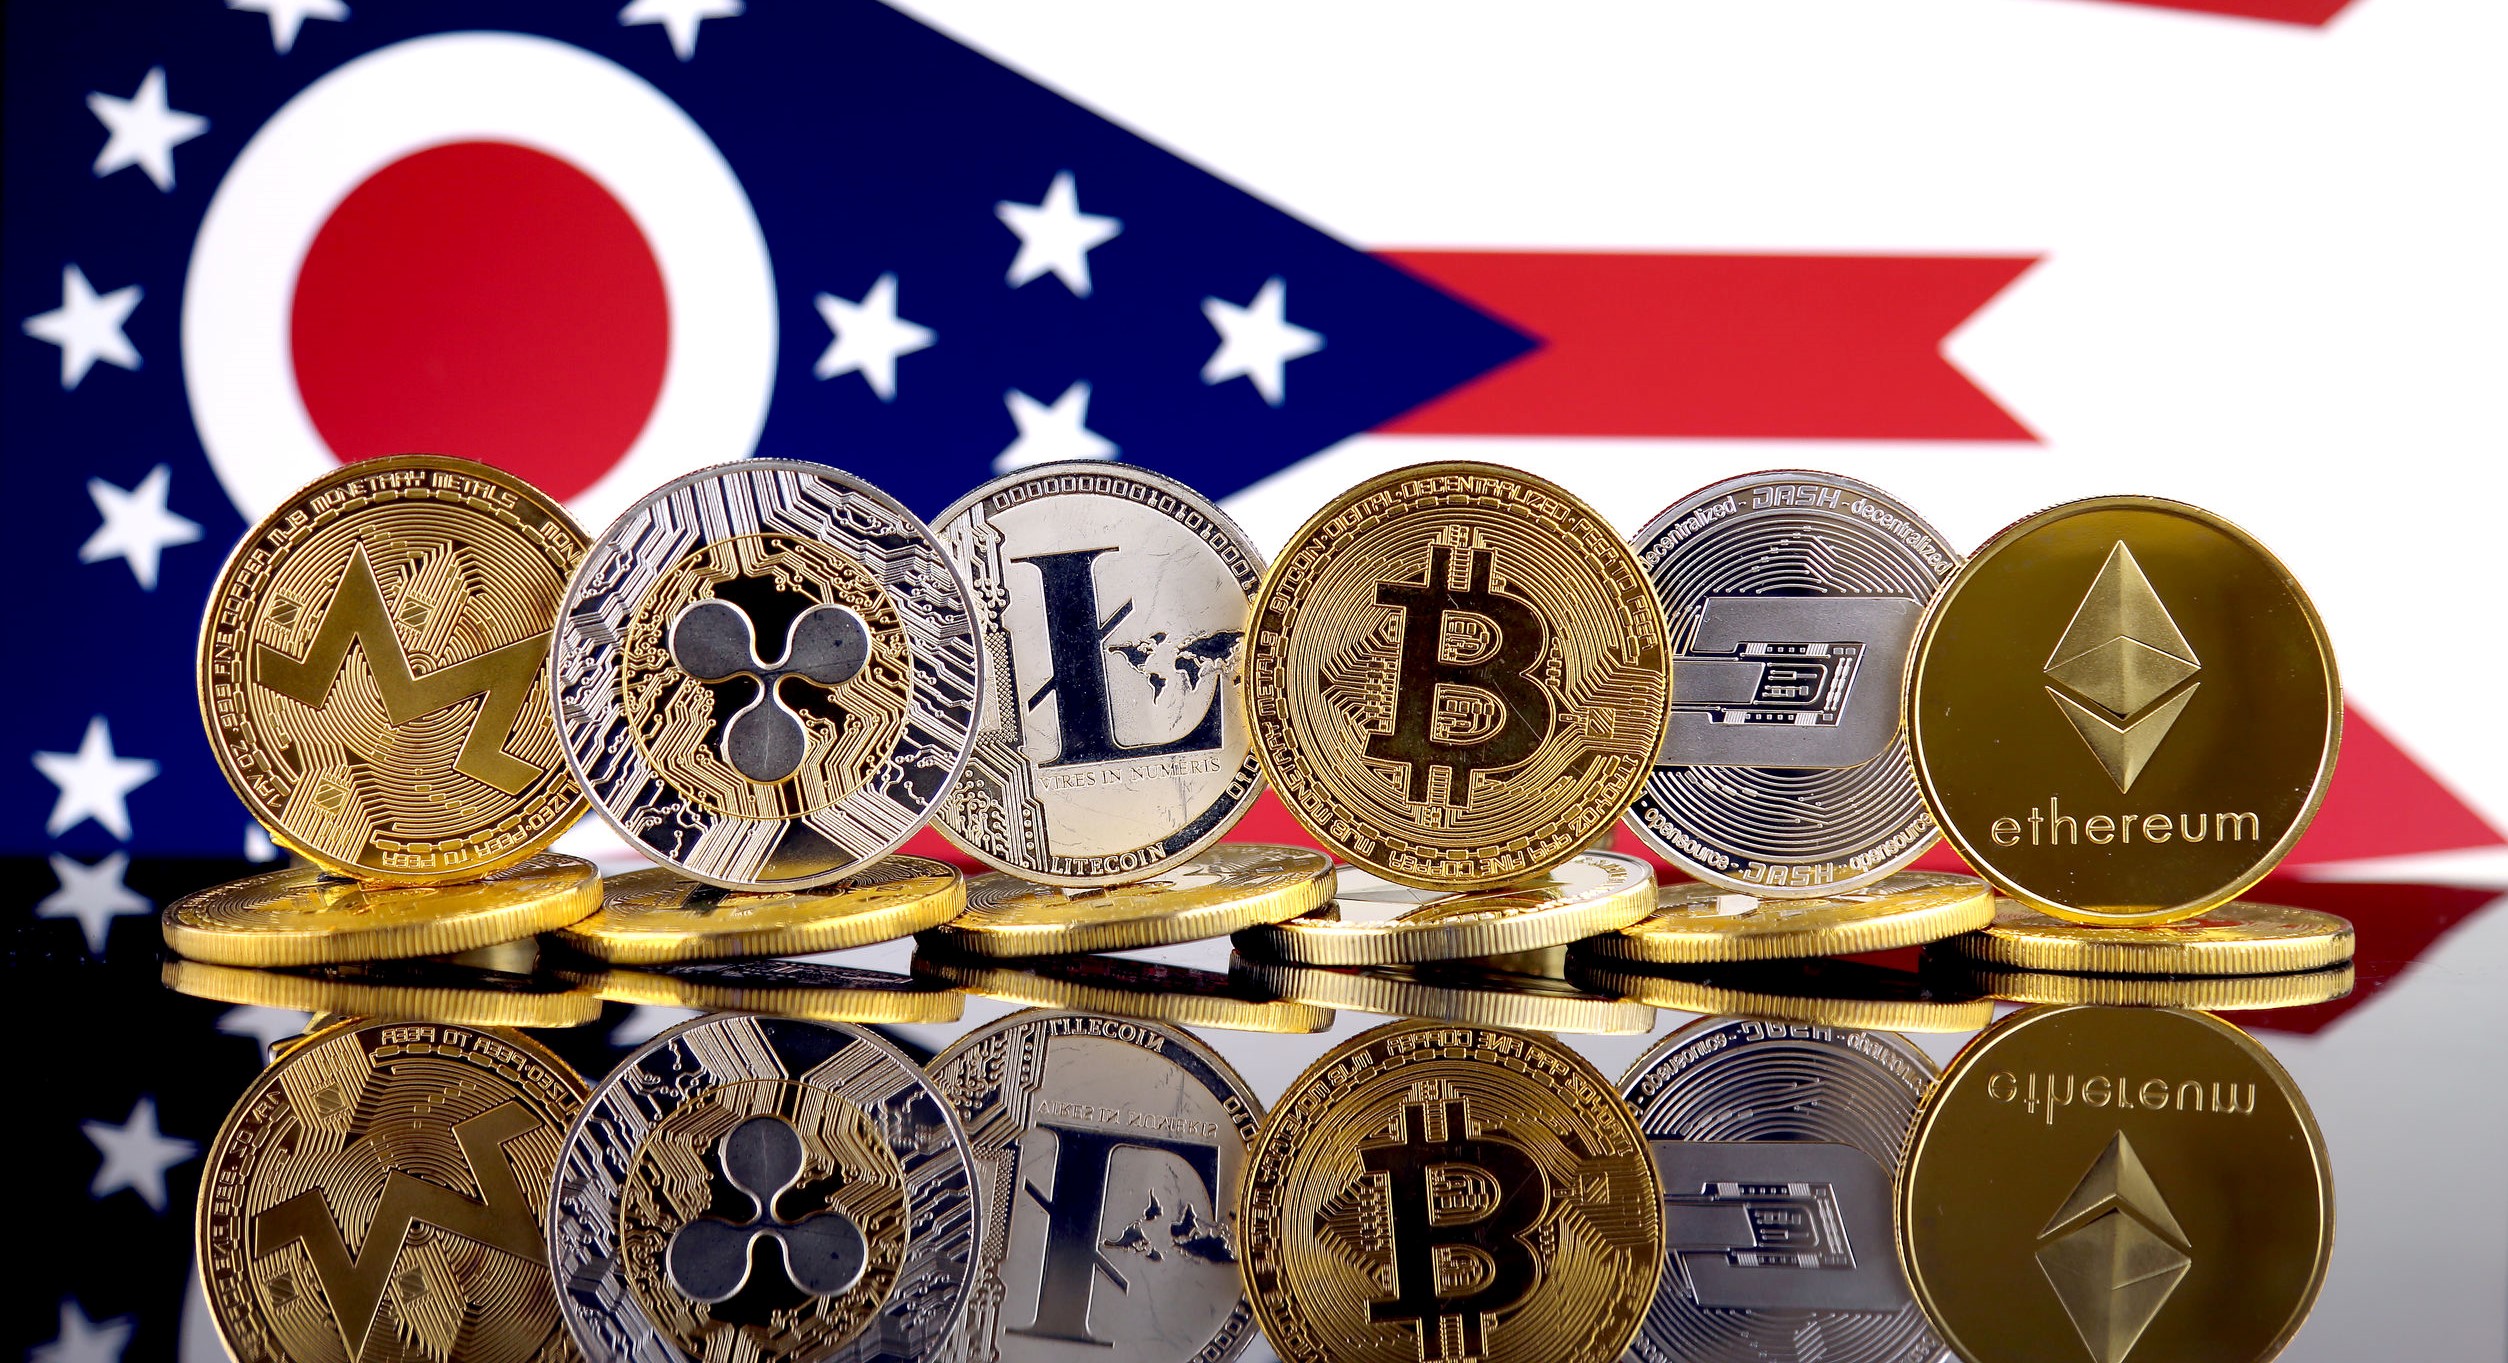 Ohio Becomes the First State to Accept Cryptocurrency for Tax Payments